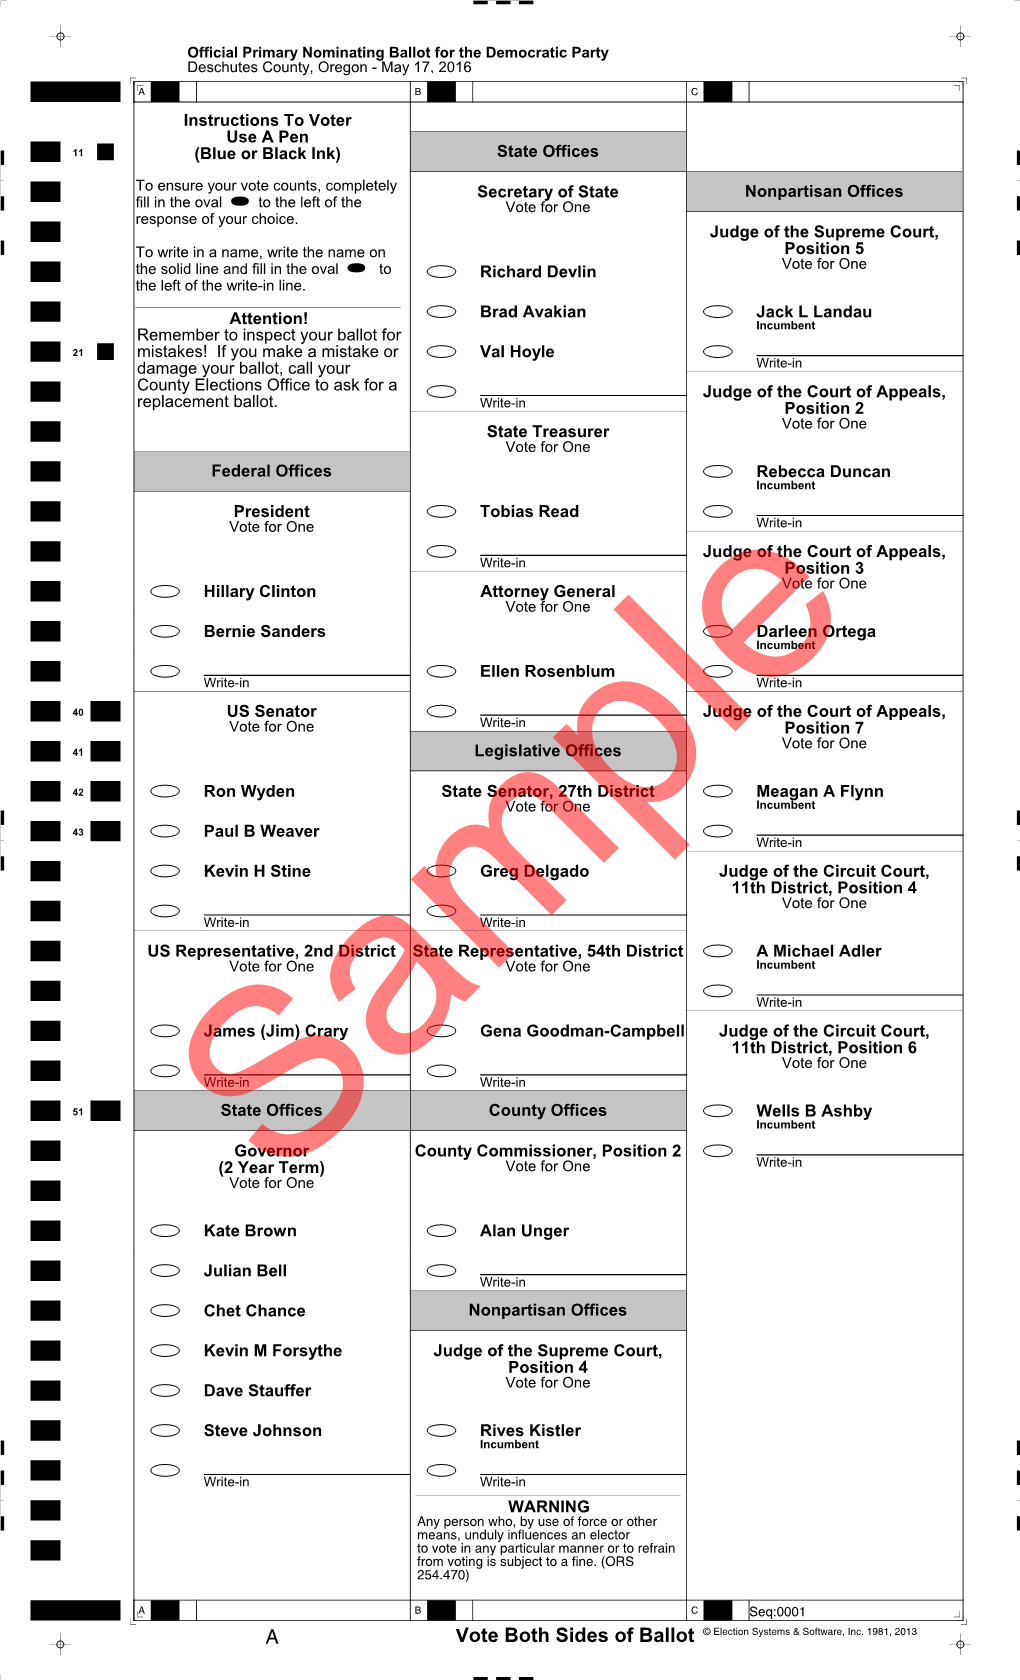 A Vote Both Sides of Ballot © Election Systems & Software, Inc